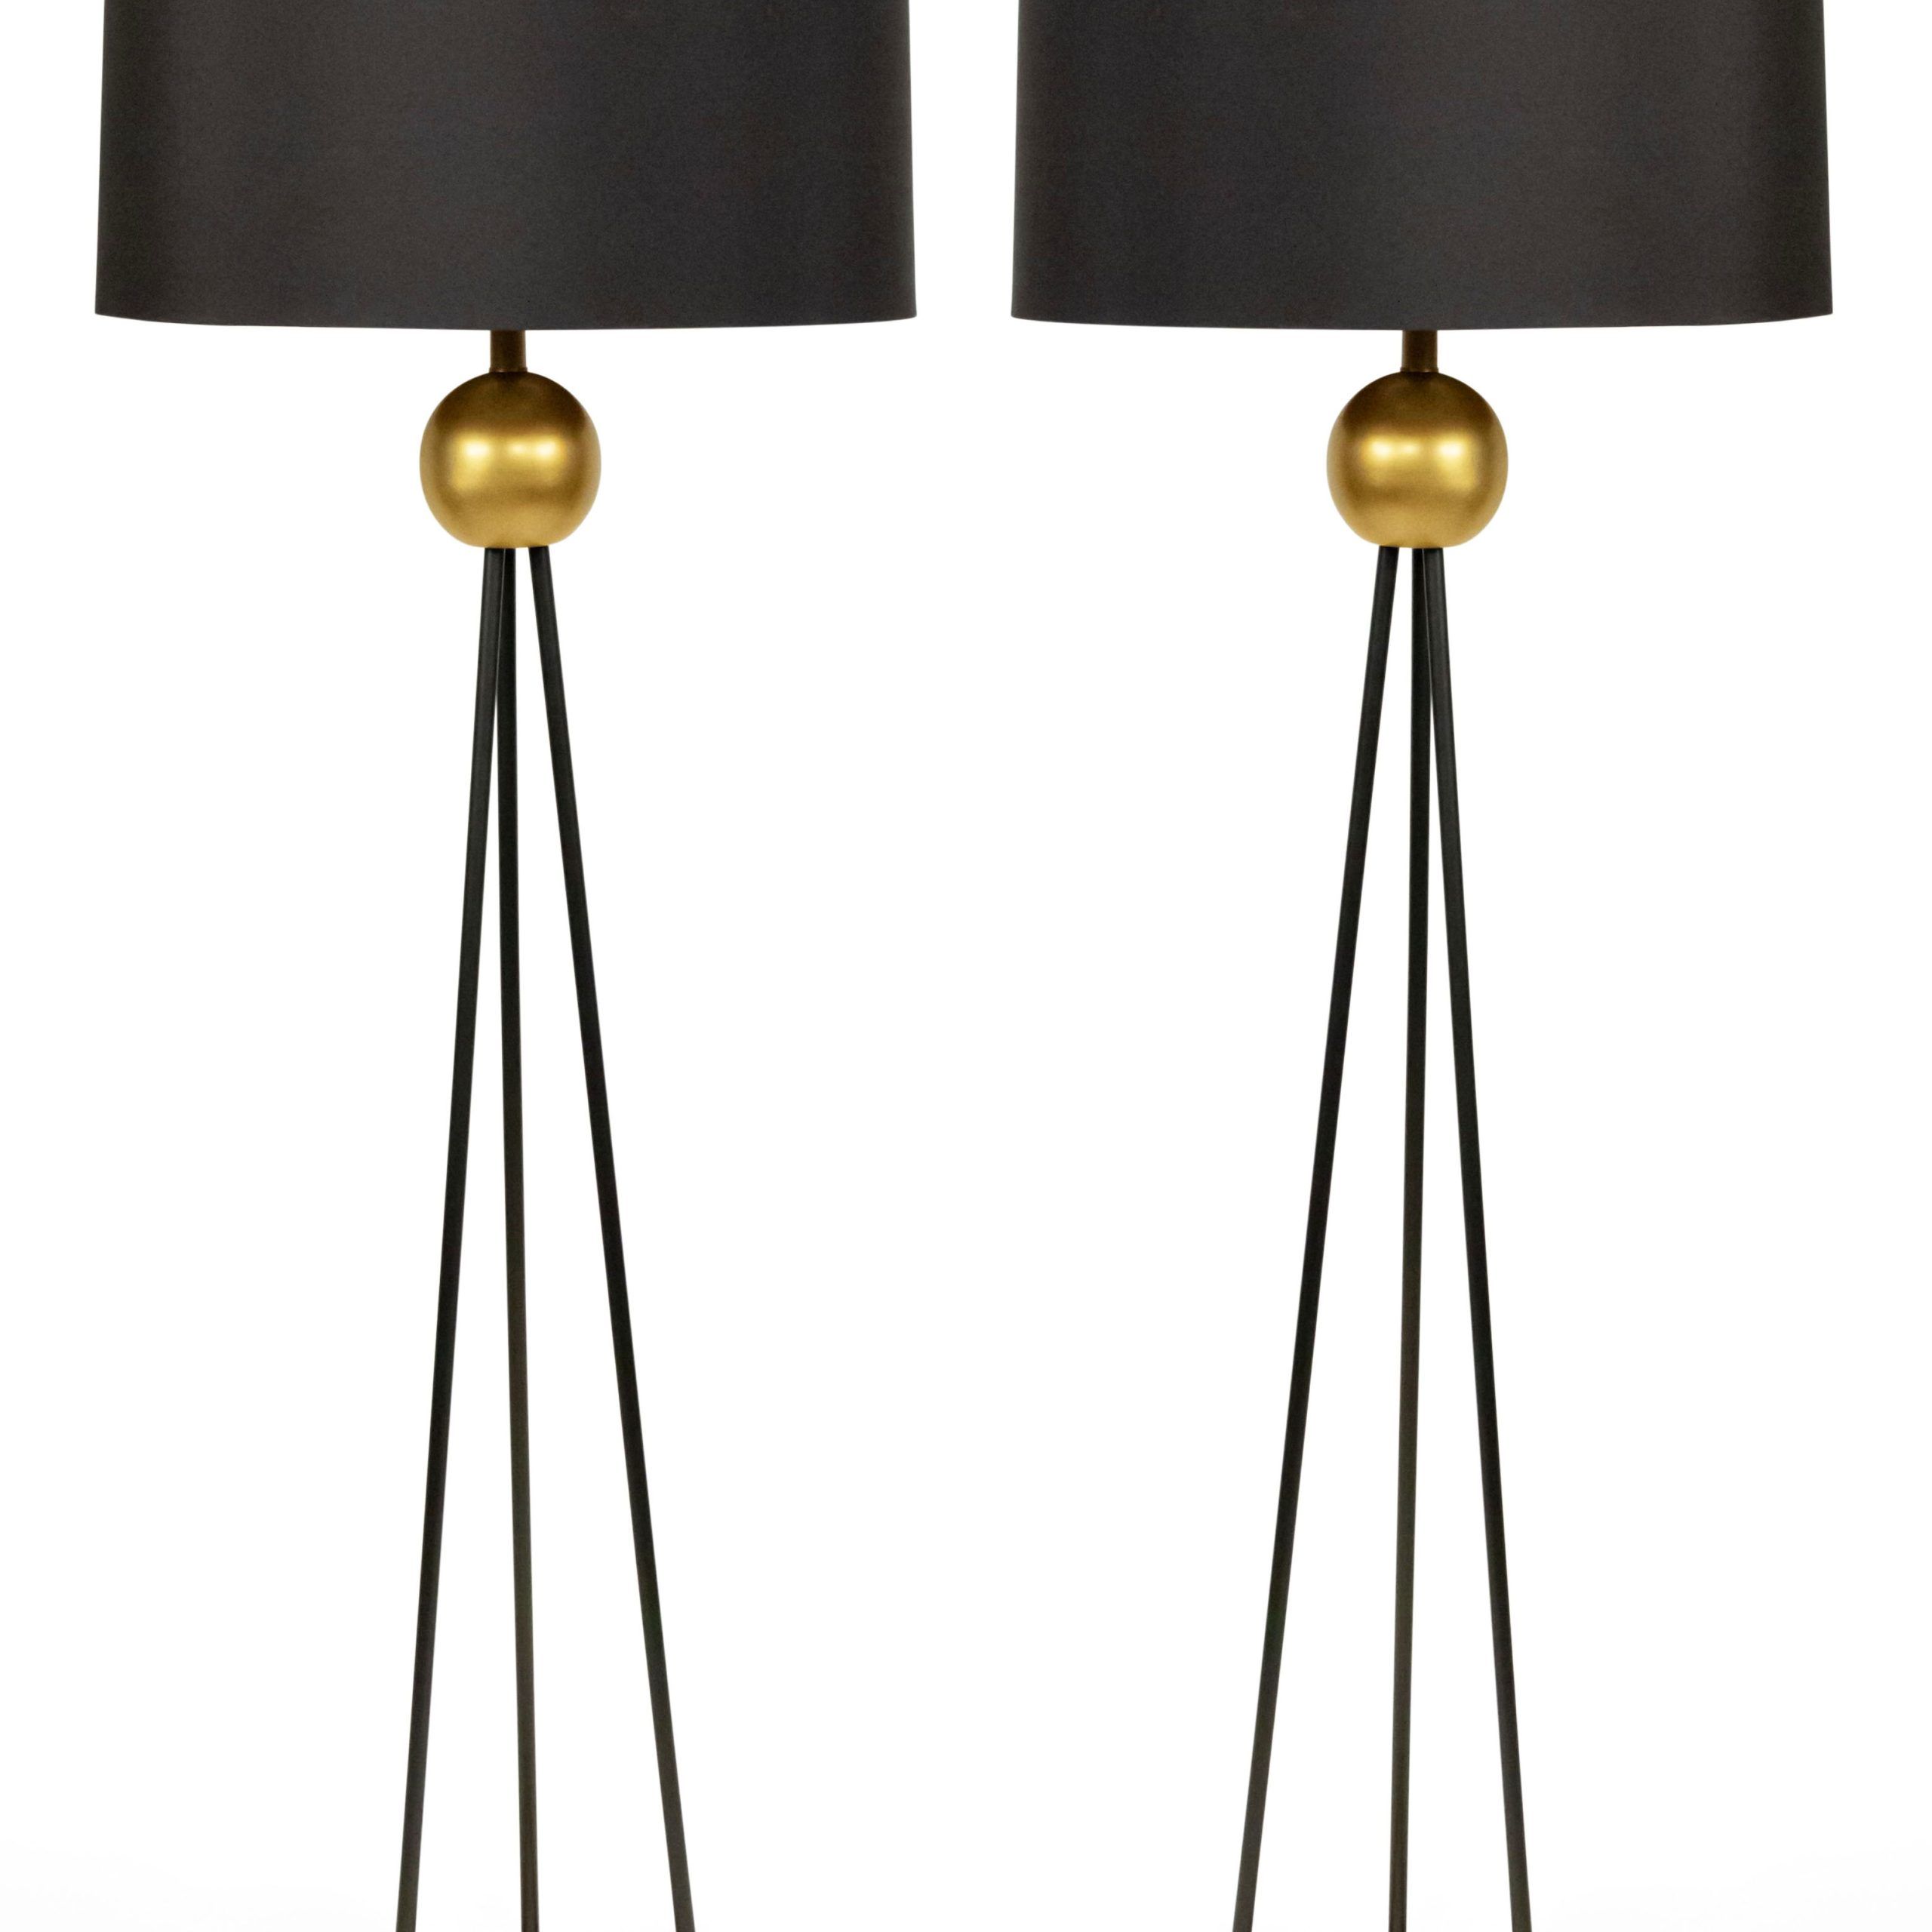 Pair Contemporary Black And Gold Metal Floor Lamps 1 Throughout Steel Floor Lamps (View 11 of 15)